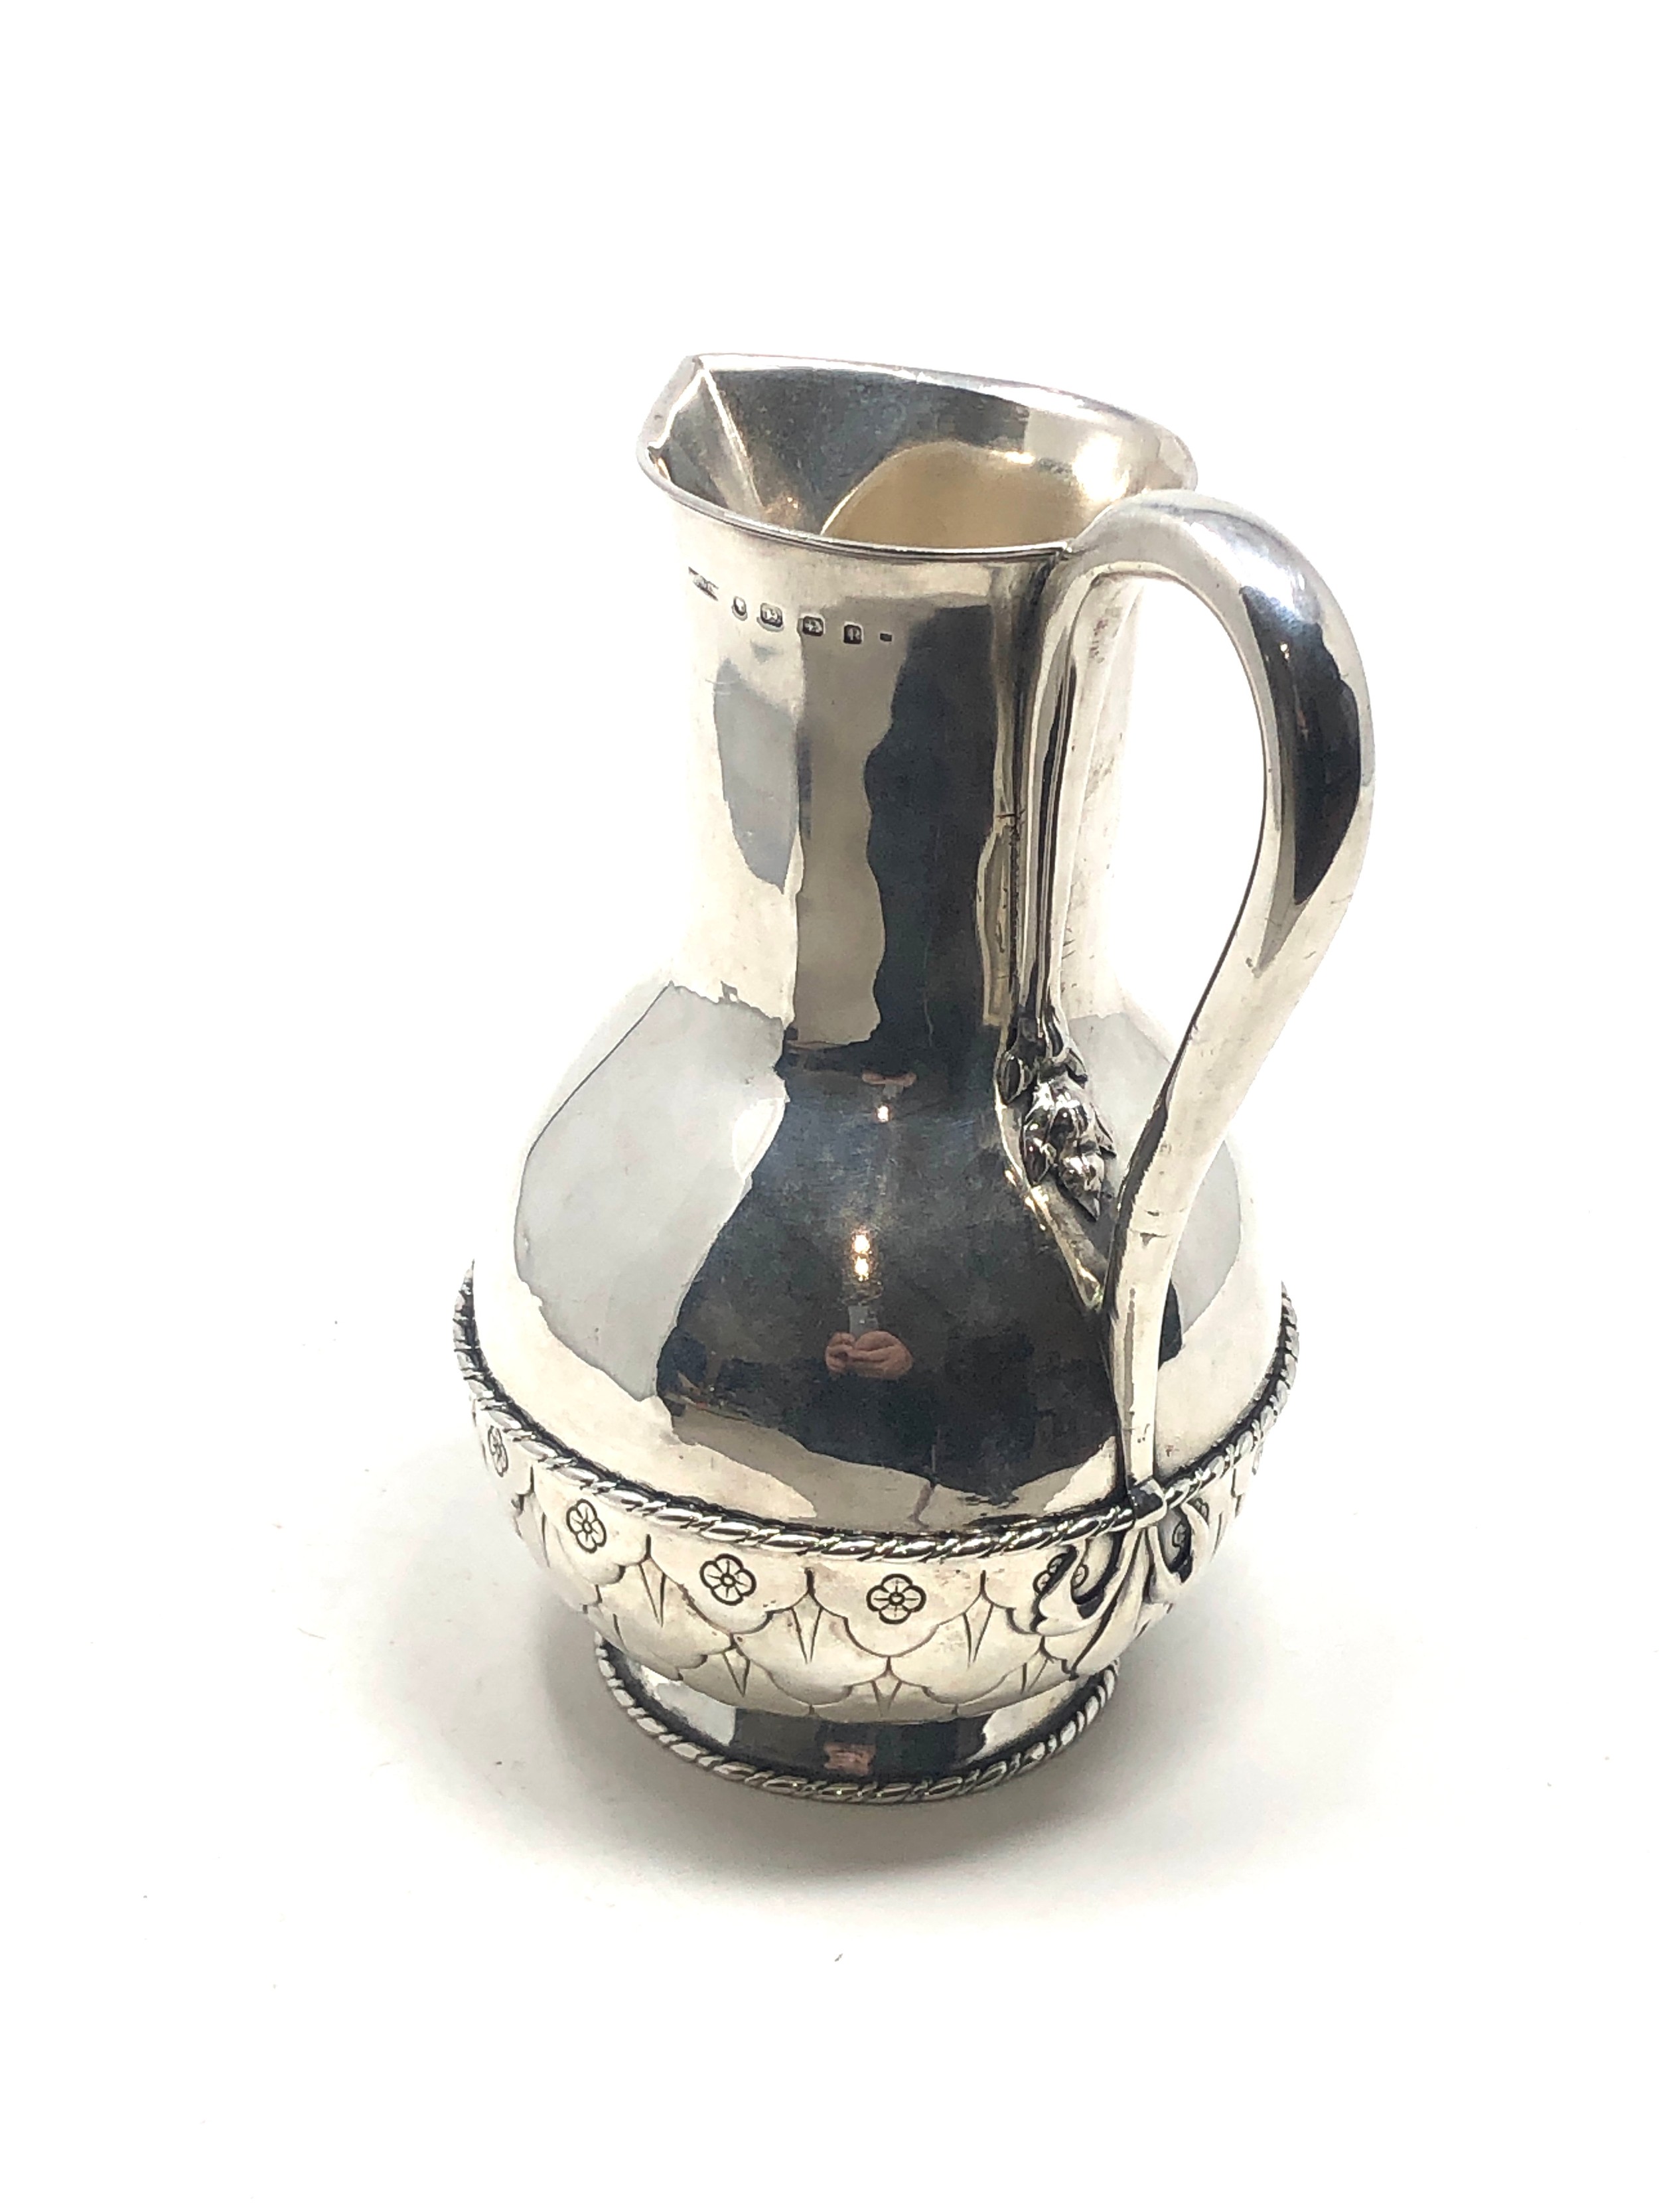 Victorian silver jug by John Hardman & Co Birmingham silver hallmarks With rope-twist borders and an